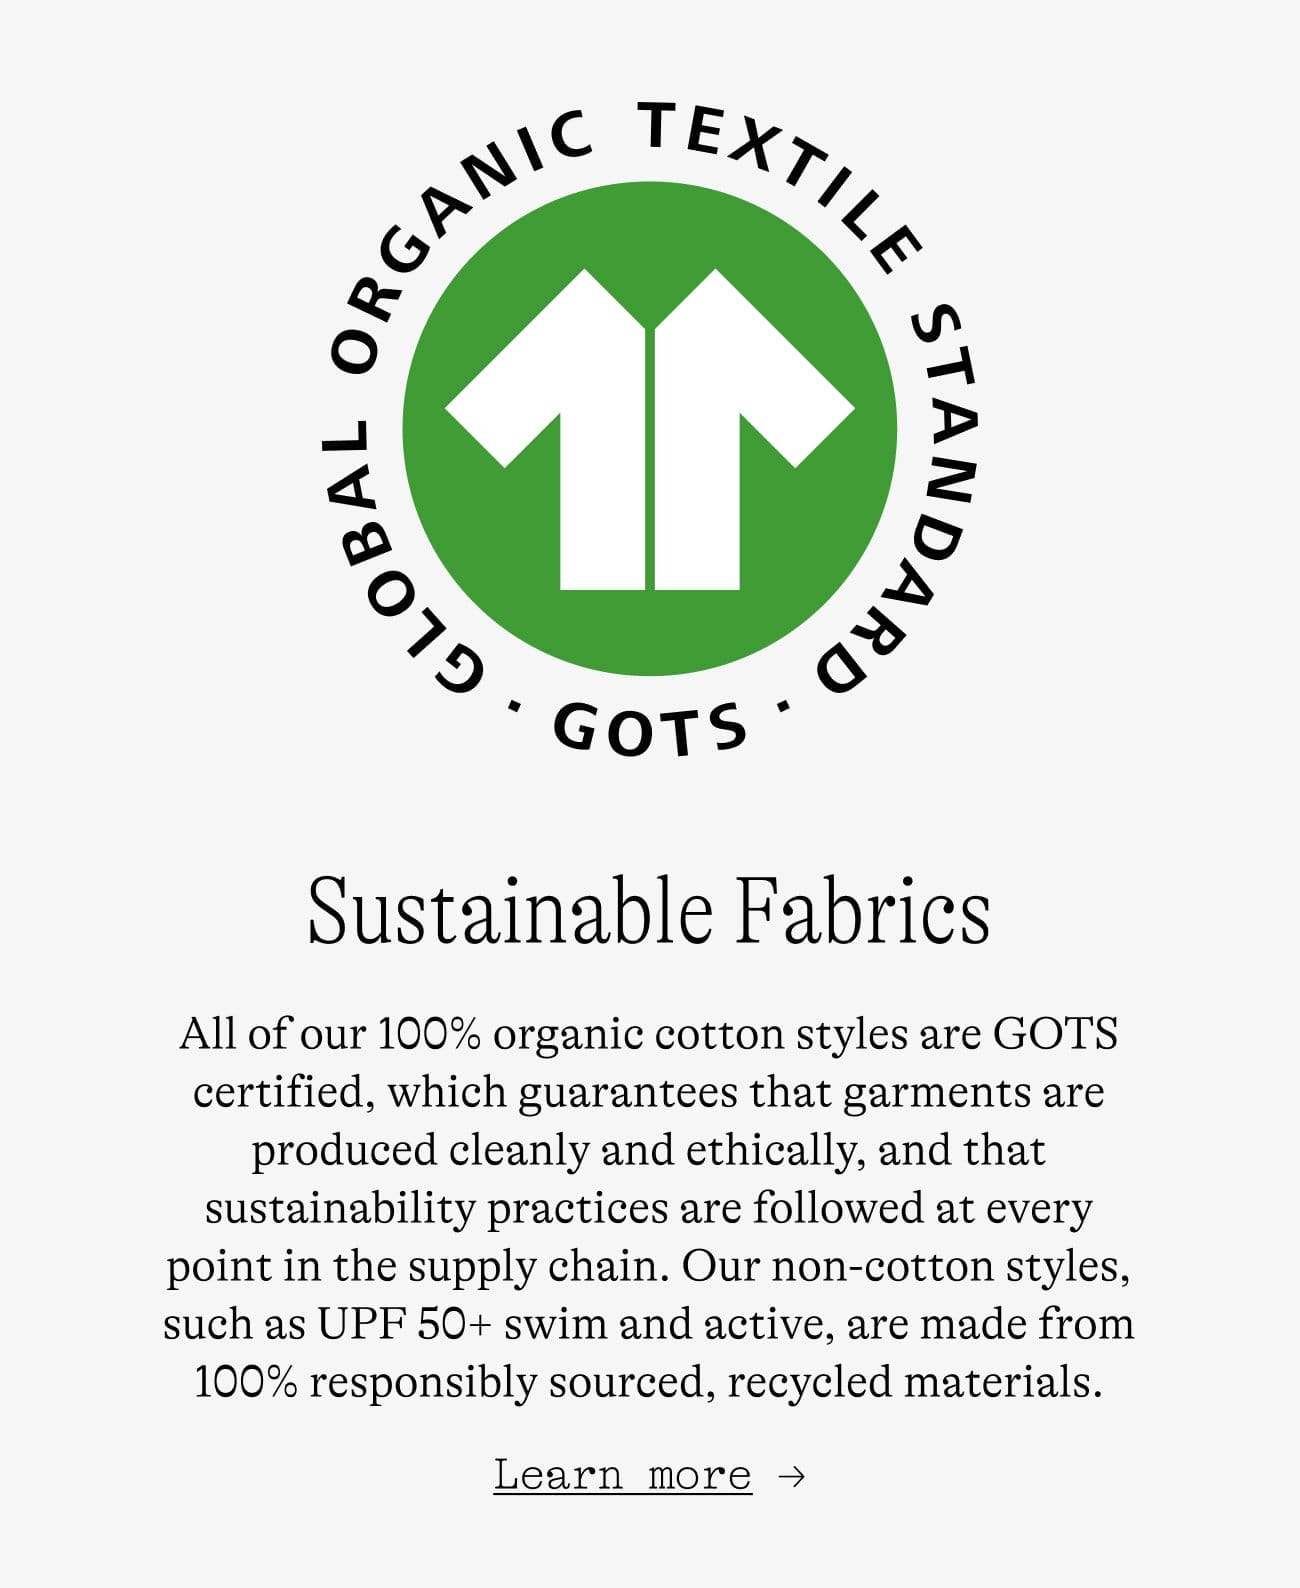 Sustainable Fabrics. All of our 100% organic cotton styles are GOTS certified, which guarantees that garments are produced cleanly and ethically, and that sustainability practices are followed at every point in the supply chain. Our non-cotton styles, such as UPF 50+ swim and active, are made from 100% responsibly sourced, recycled materials. Learn more